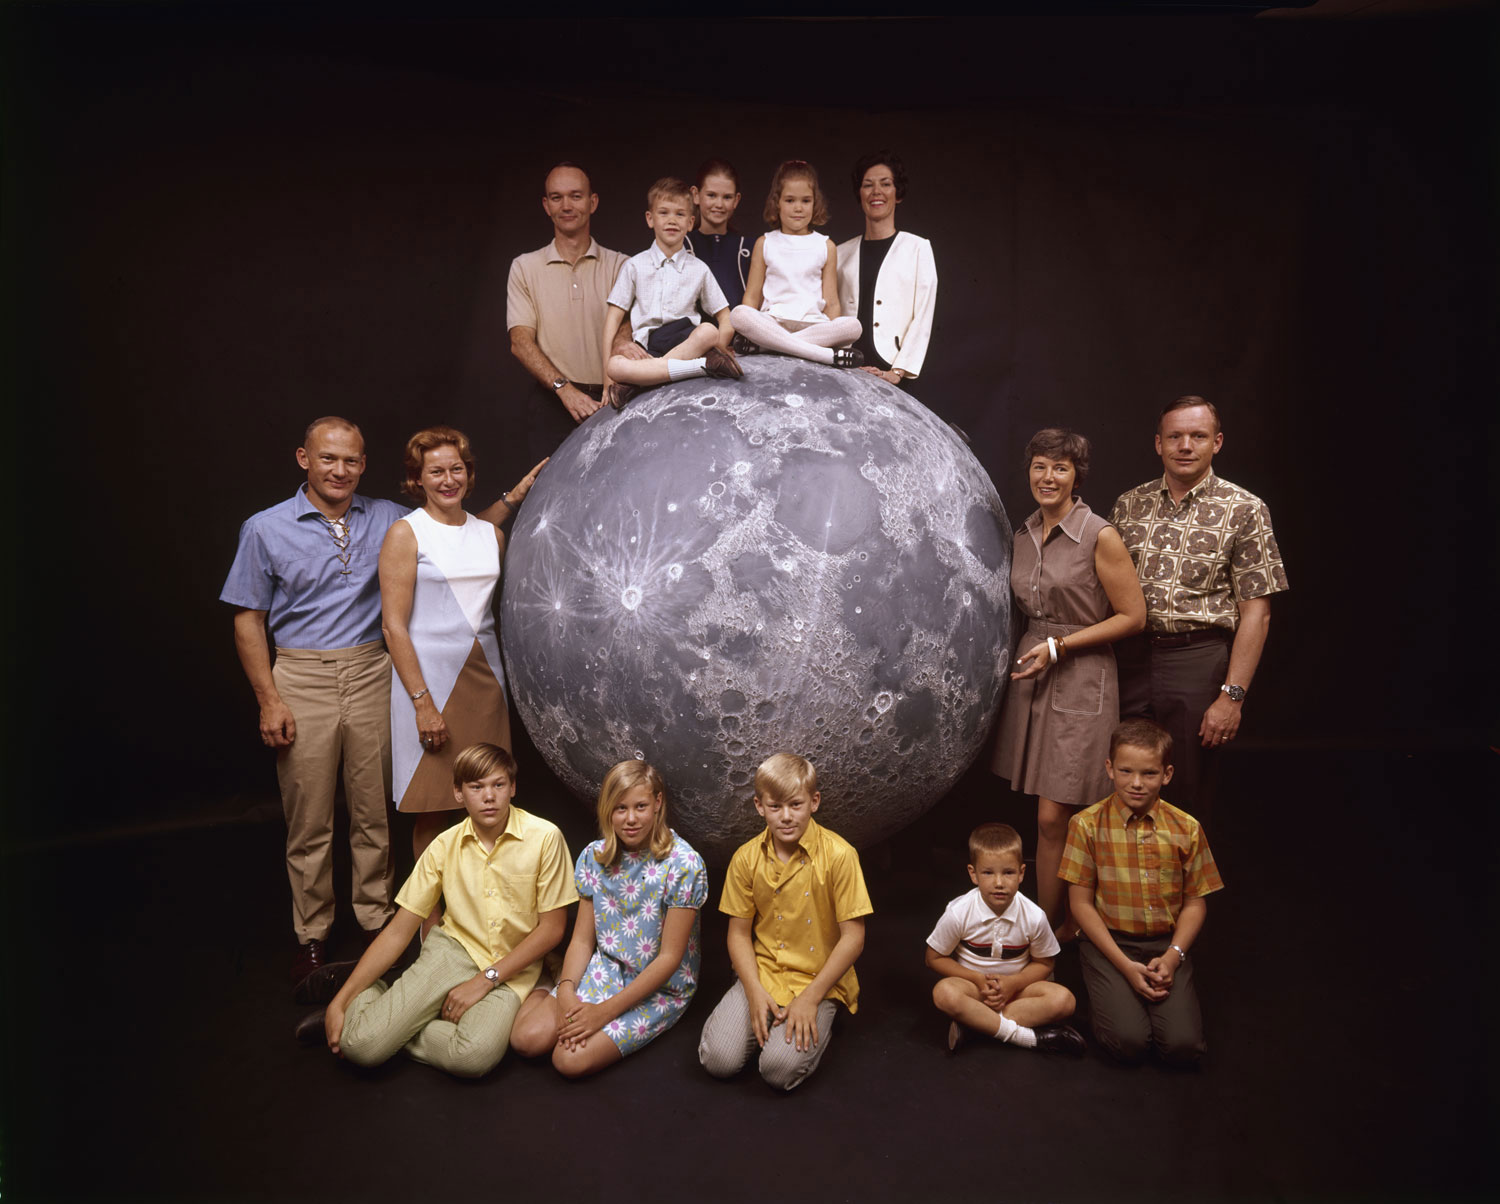 Not published in LIFE. The Apollo 11 astronauts and their families pose with a scale model of the moon, spring 1969.